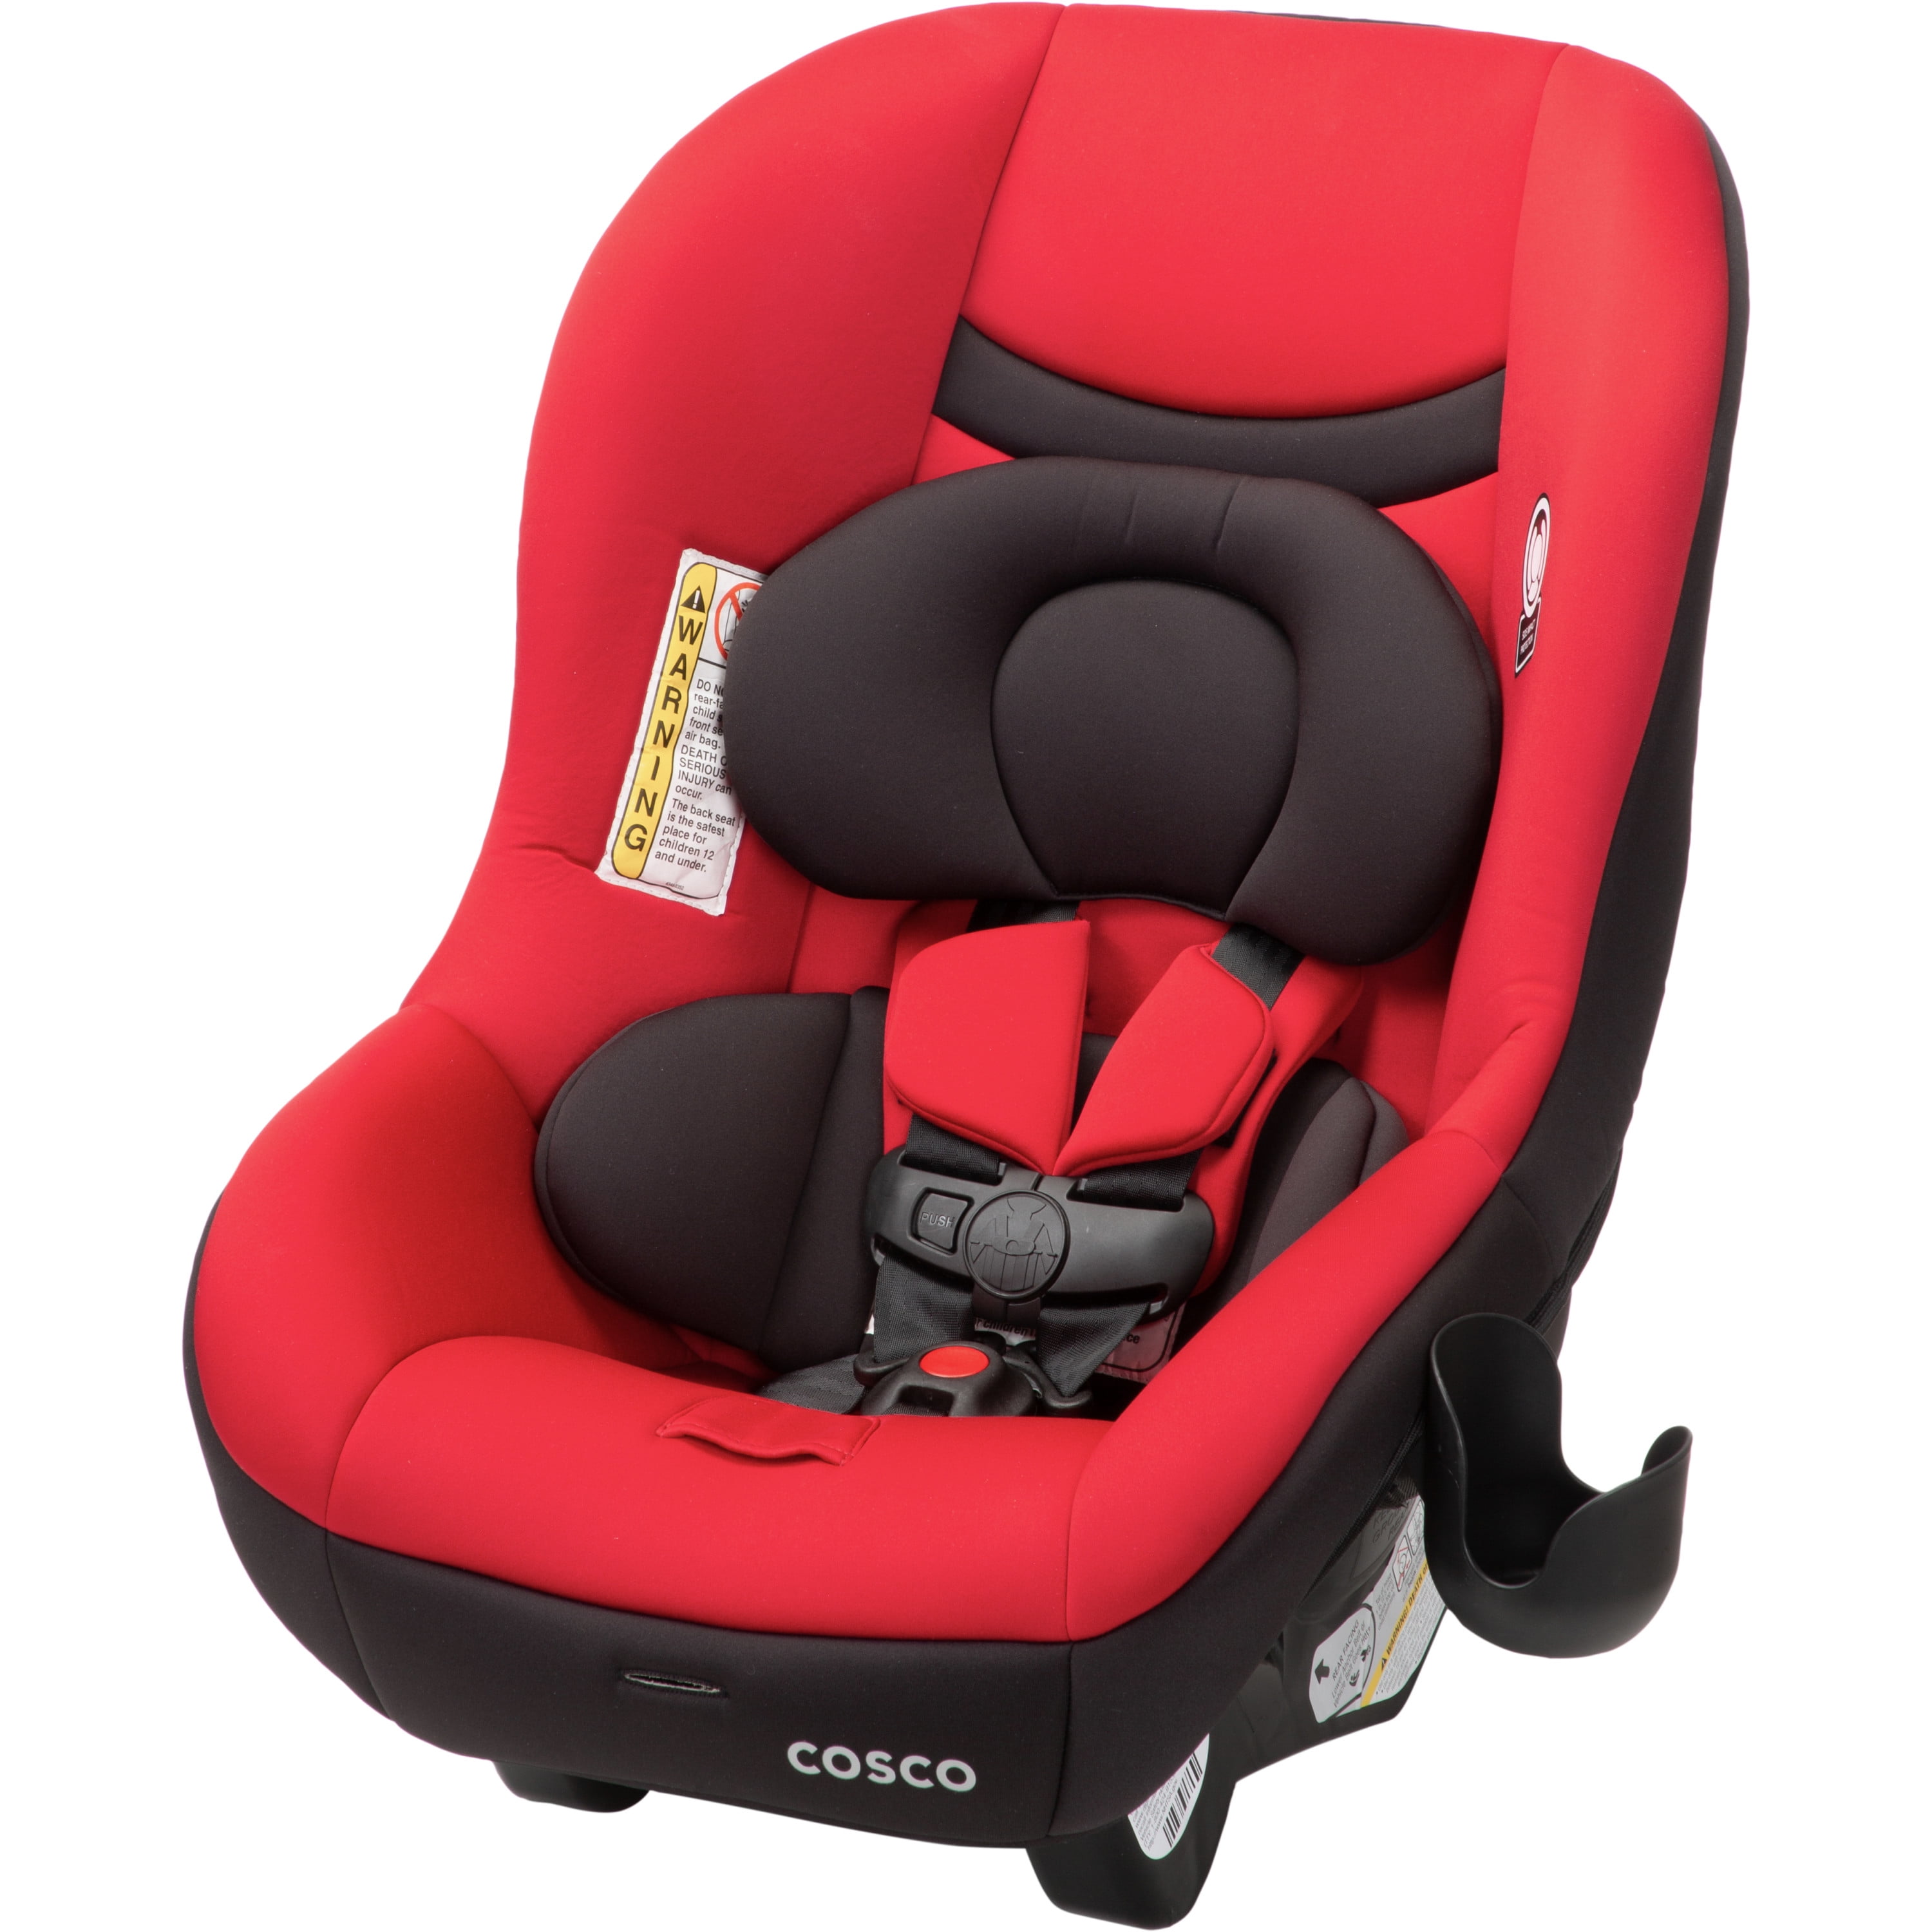 Walmart Cosco Car Seat Top 3 Picks and Purchase Guide Rate Car Seat